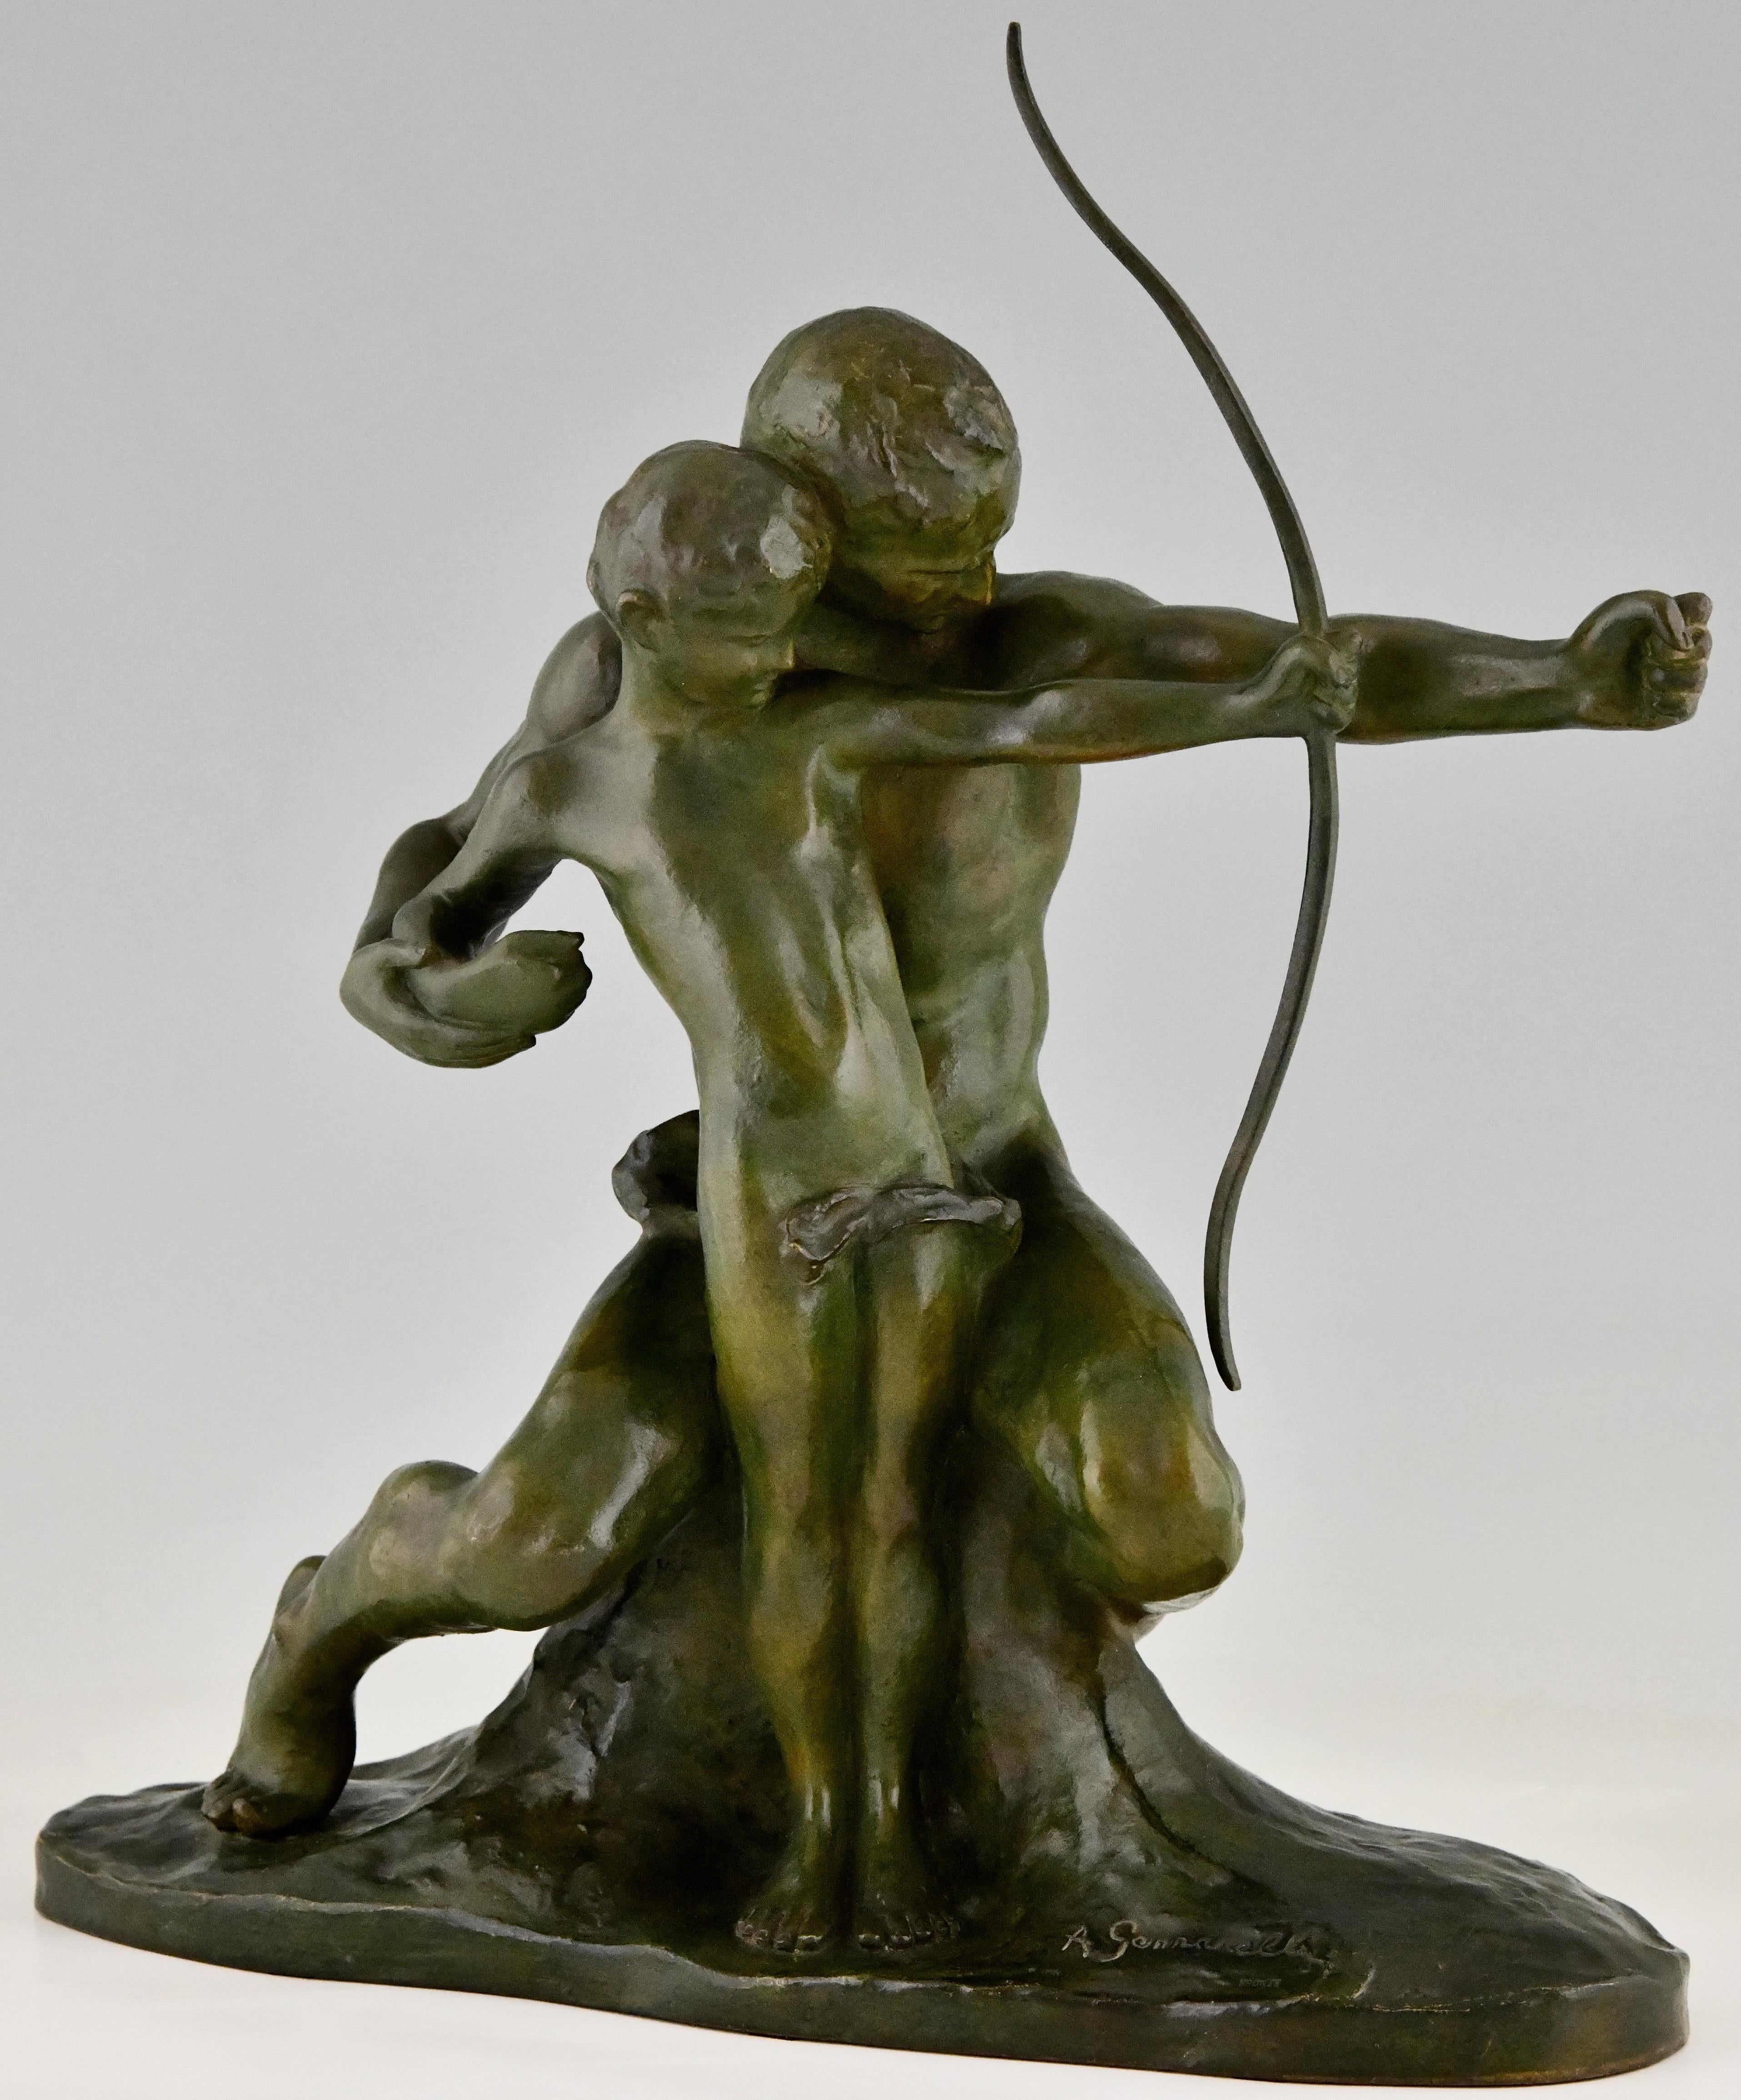 The young archer, Art Deco bronze sculpture of a boy learning to use a bow. By Amadeo Gennarelli, Born in Napels, worked in France. The bronze has a lively green patina, France ca. 1930.

Literature:
Art Deco sculpture by Victor Arwas, Academy.